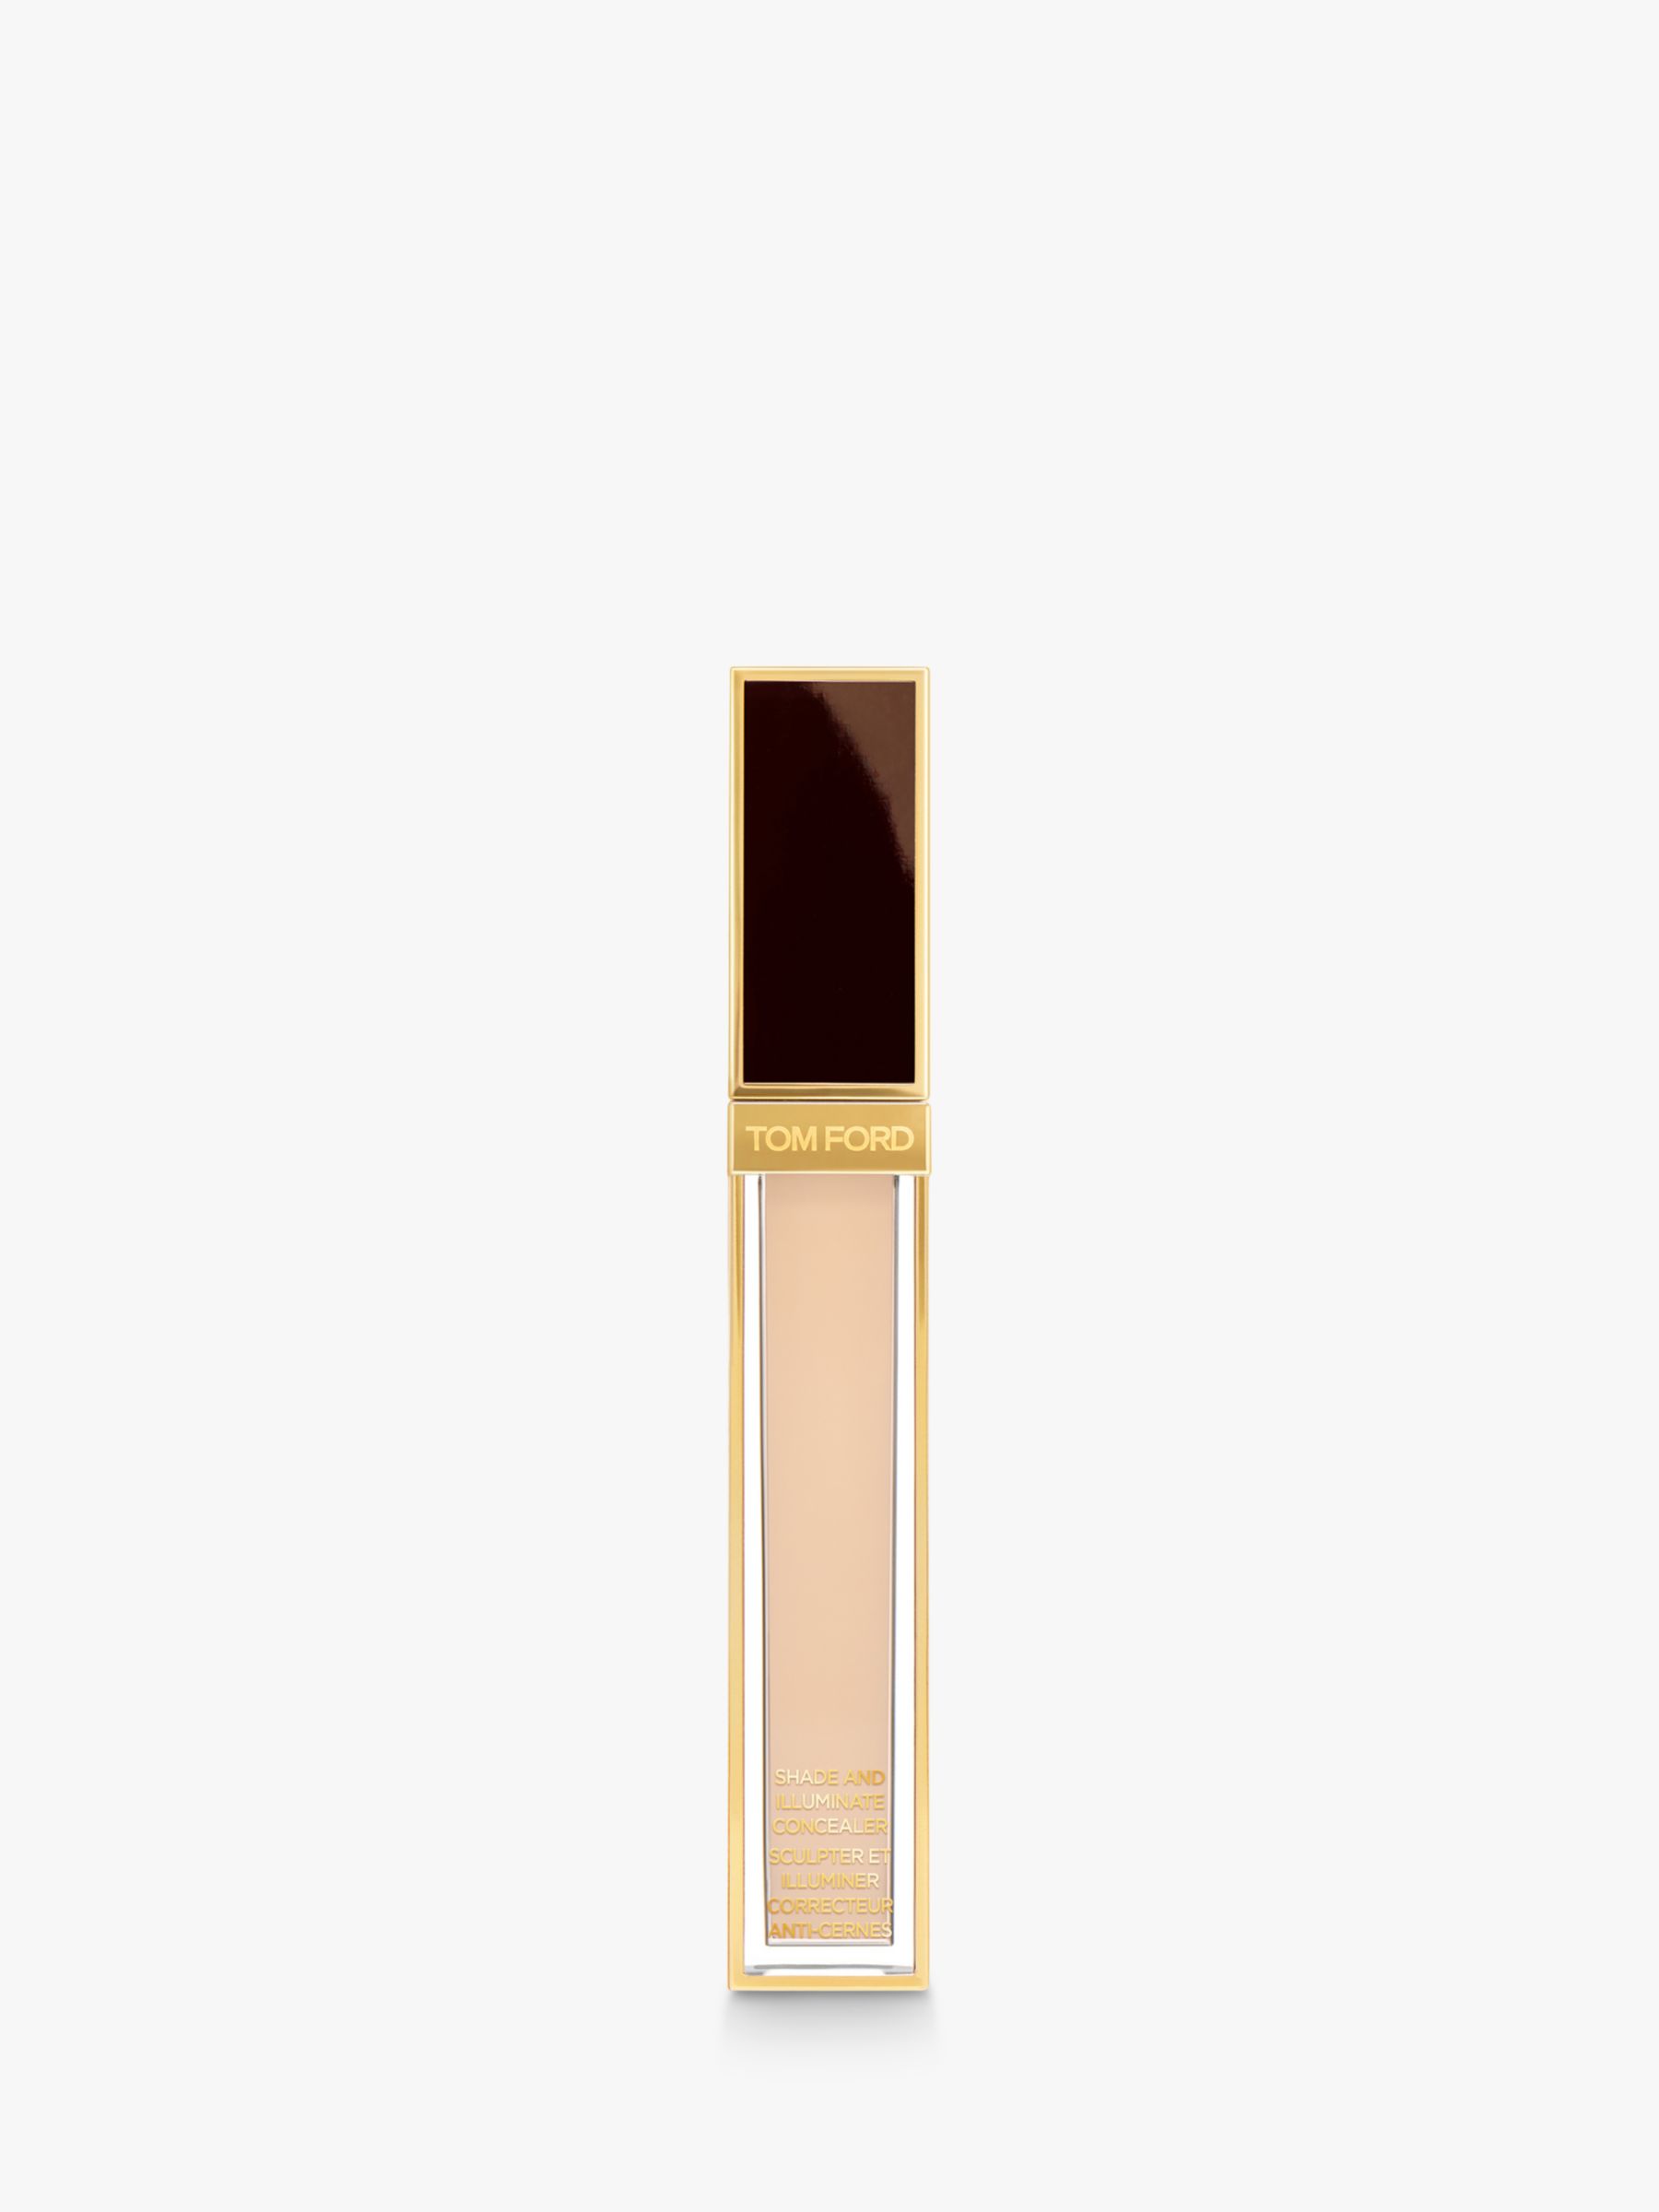 TOM FORD Shade & Illuminate Concealer, 0W0 Shell 1